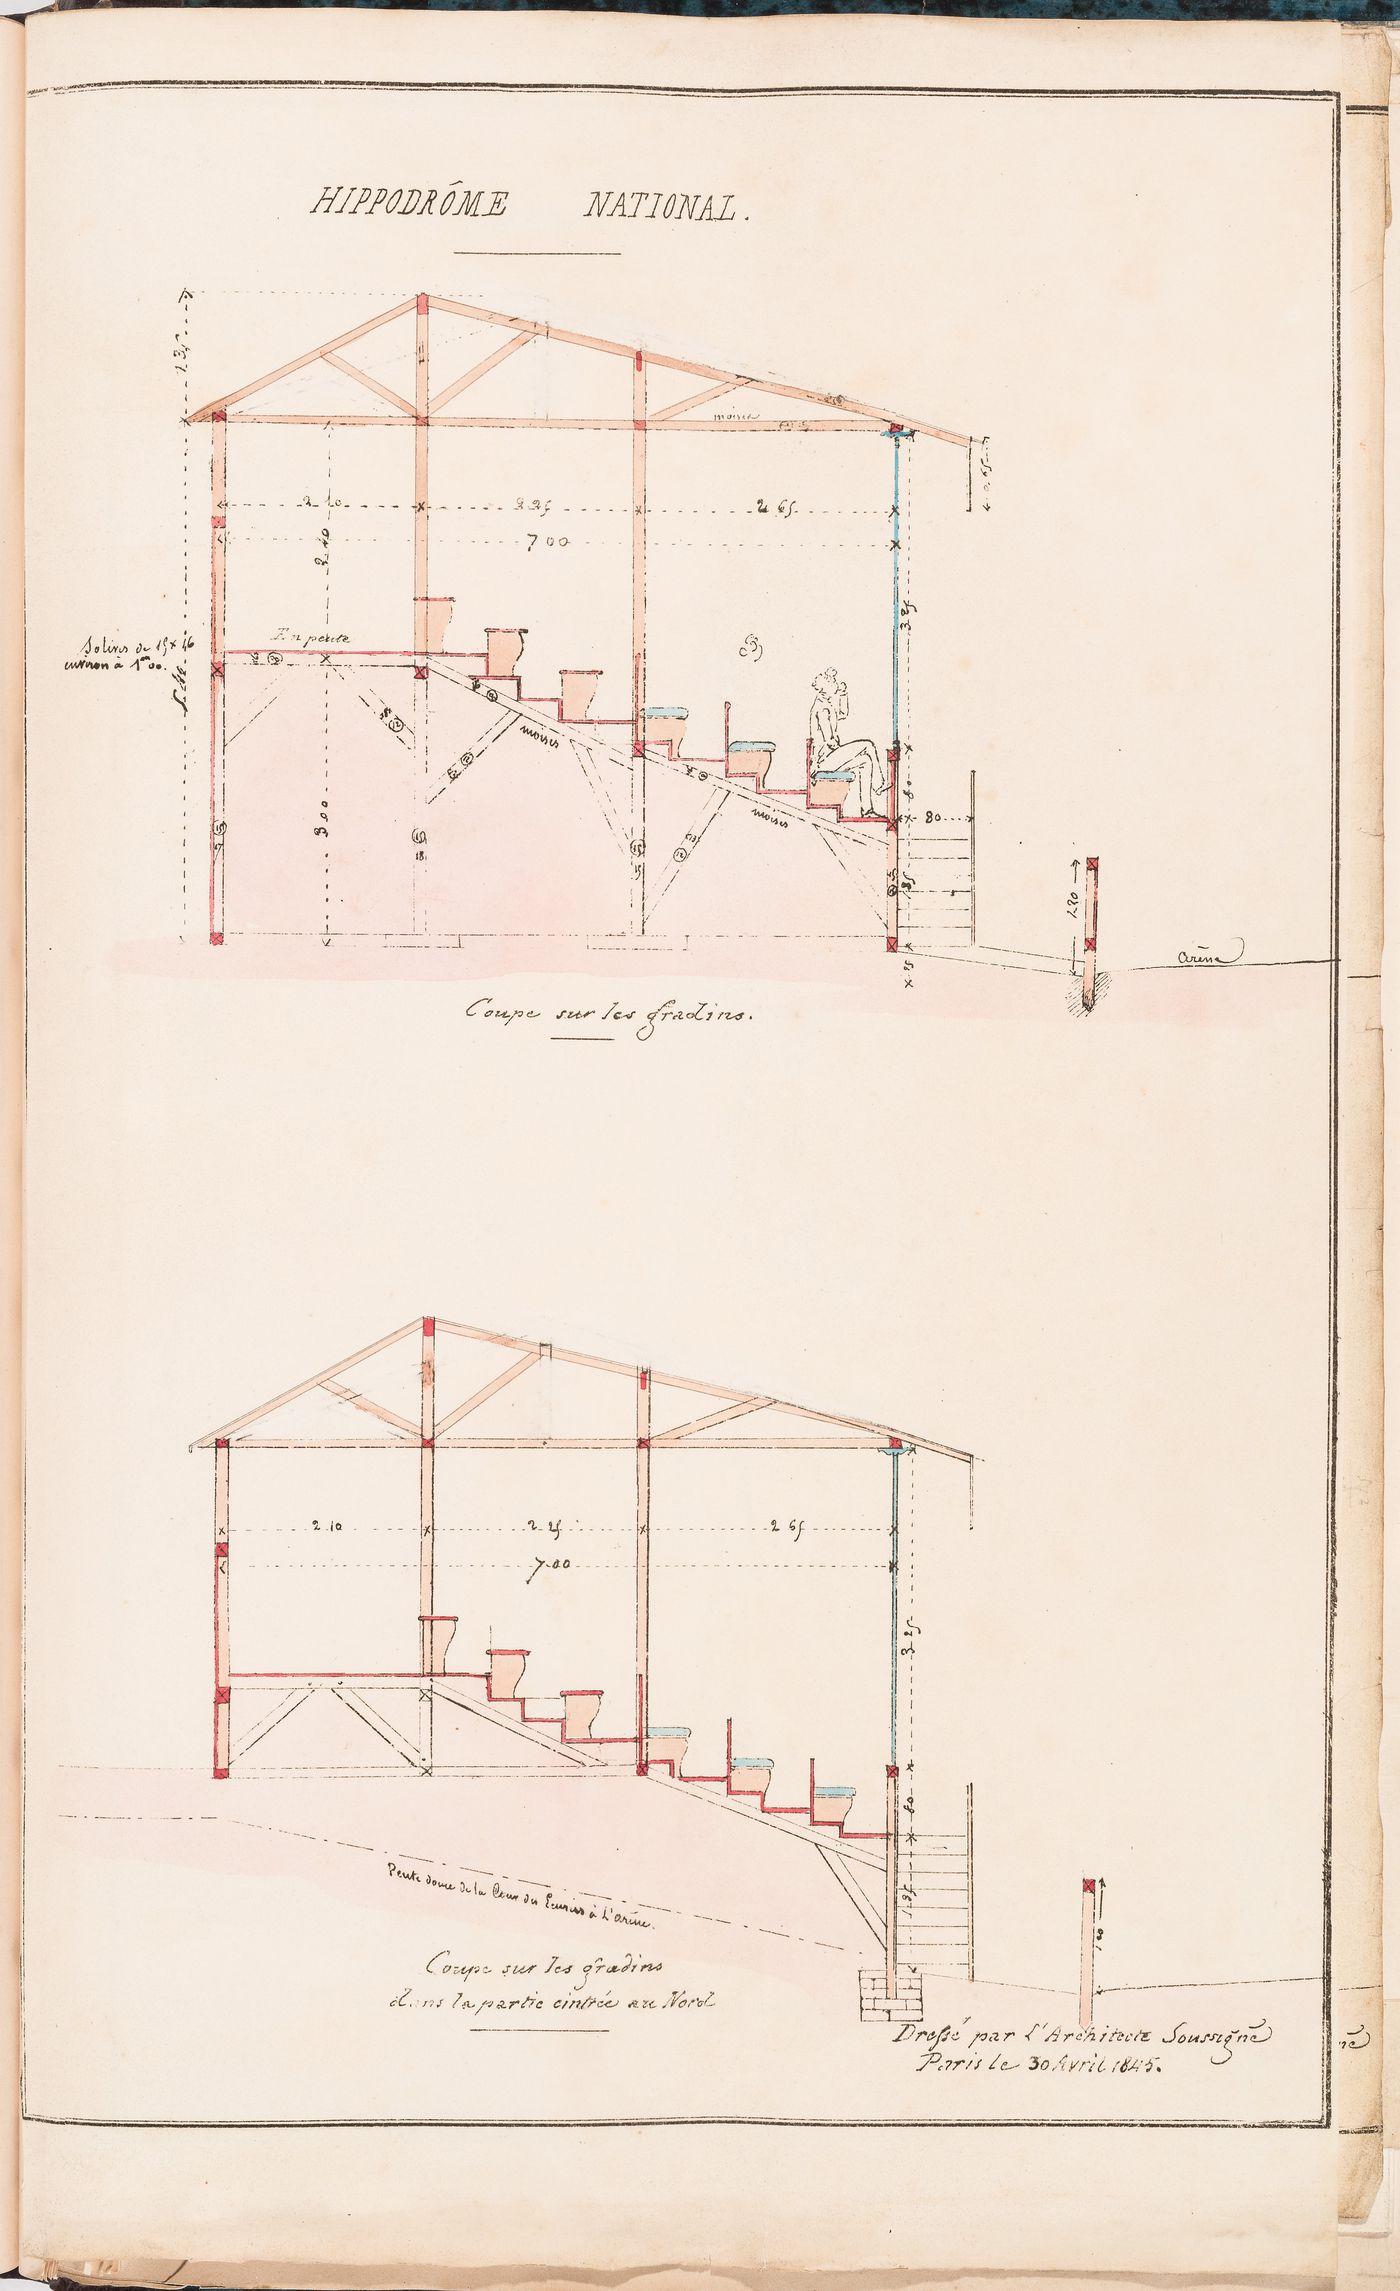 Hippodrome national, Paris: Sections through the grandstand